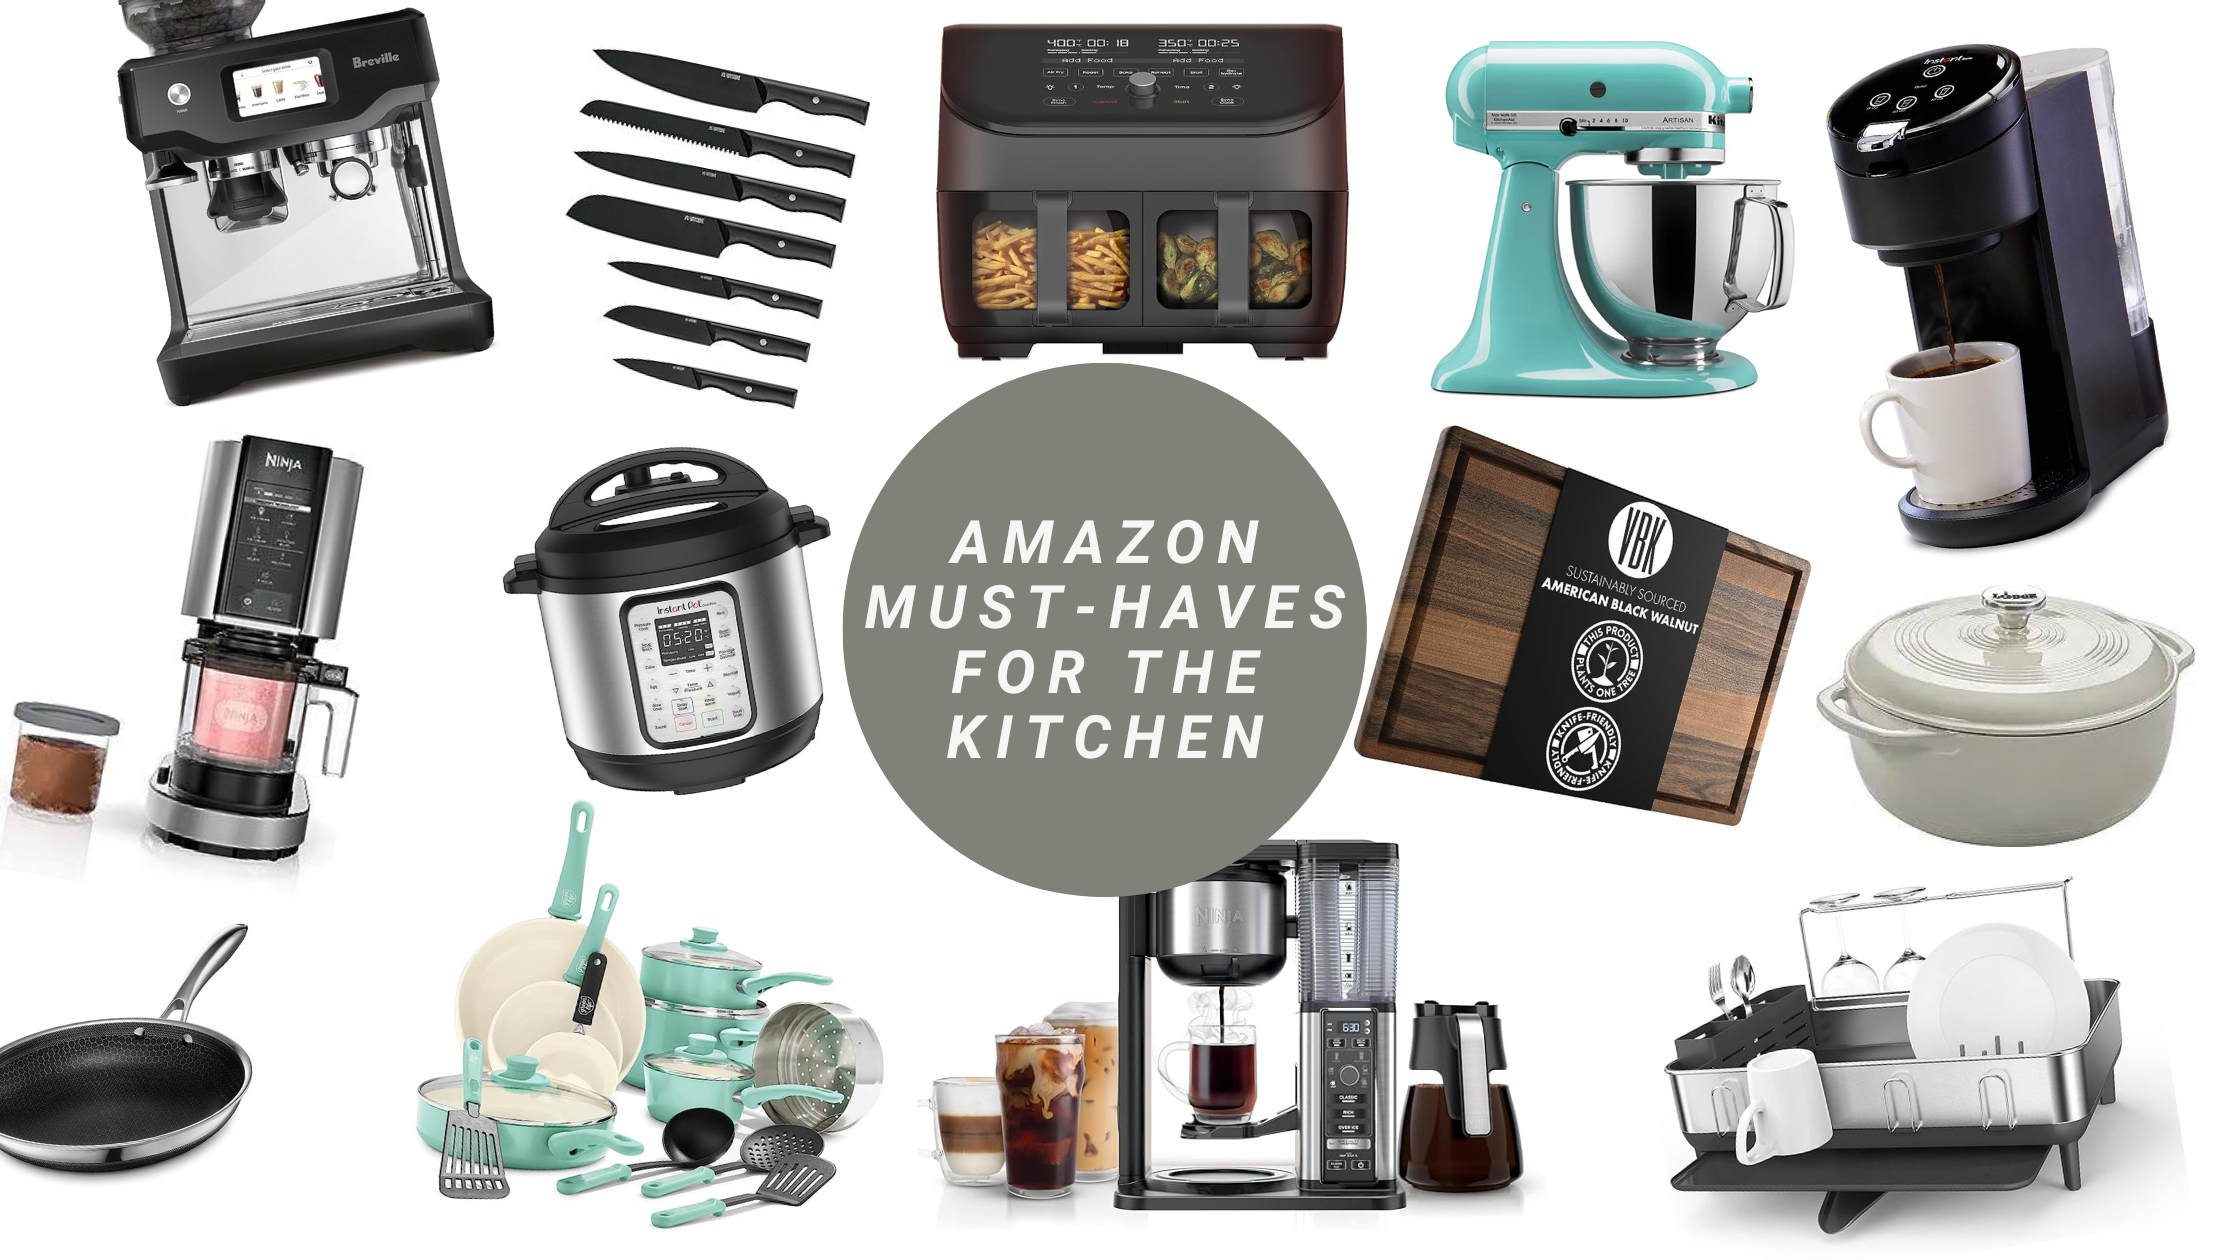 Amazon Must-Haves for the Kitchen